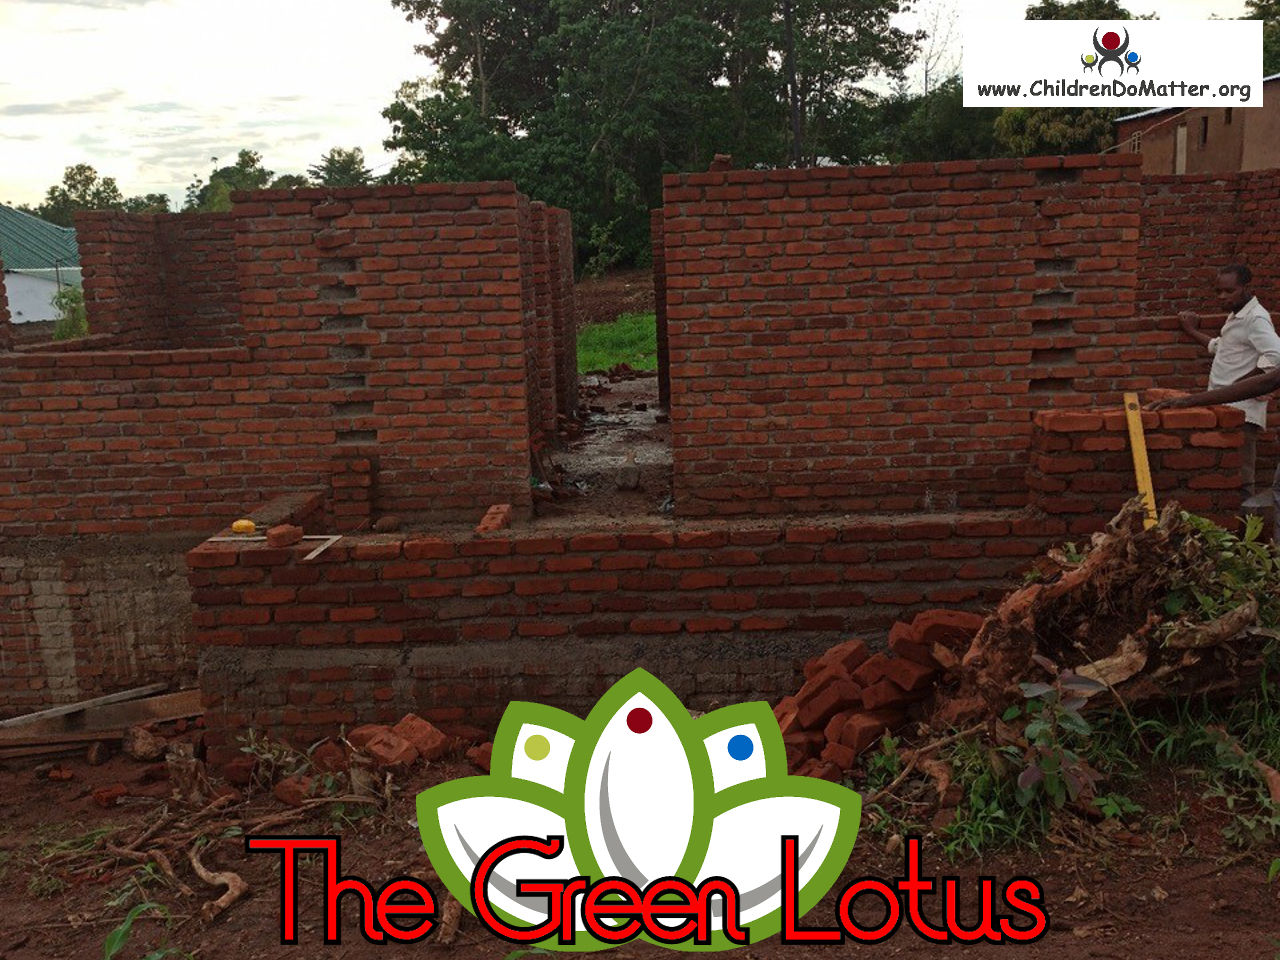 the making of the green lotus orphanage in blantyre malawi - children do matter - 14